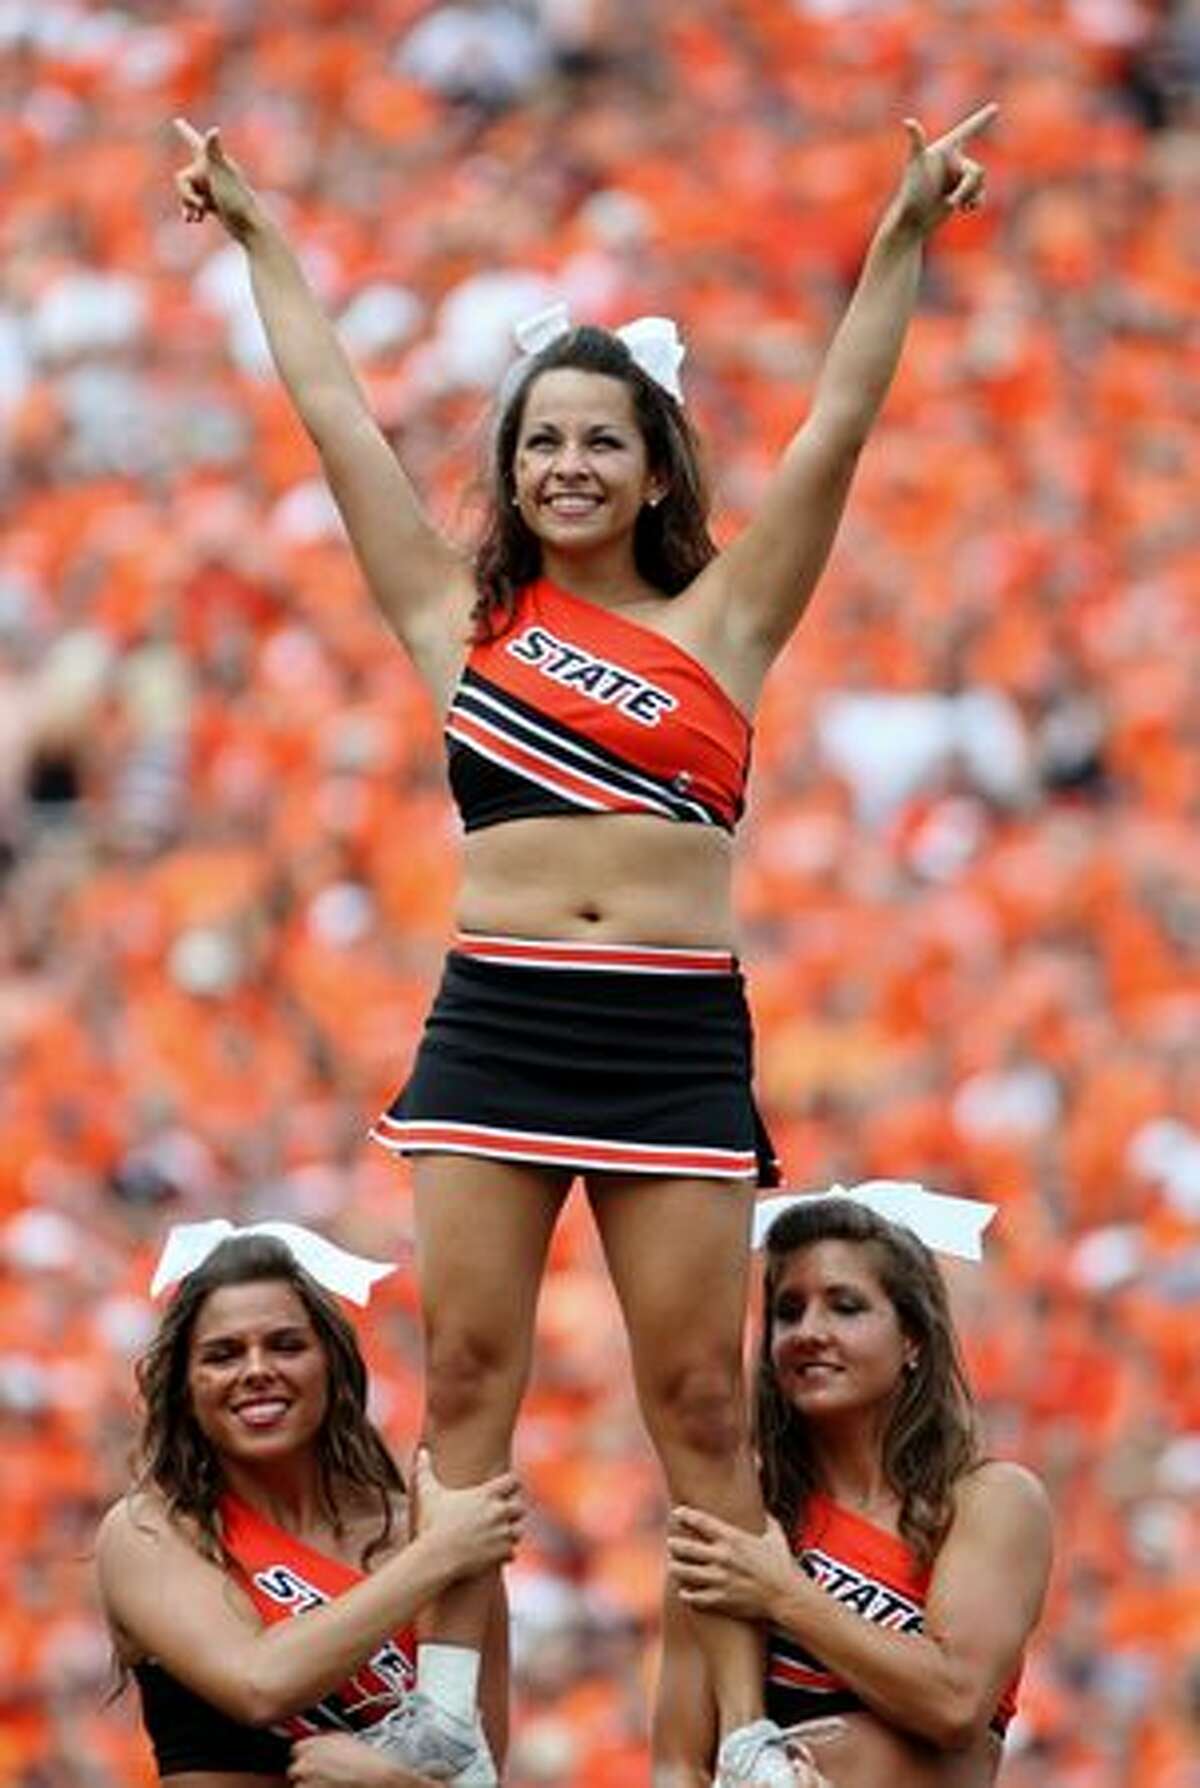 Cheerleaders from Oklahoma State University perform from the sidelines during the first quarter of a game against Georgia in September. Cheerleading is recognized as a sport on most U.S. college campuses and carries with it elements of danger and injury risk that sometimes outweigh those of other collegiate sports. All of the photos in this gallery are from collegiate games played this season.